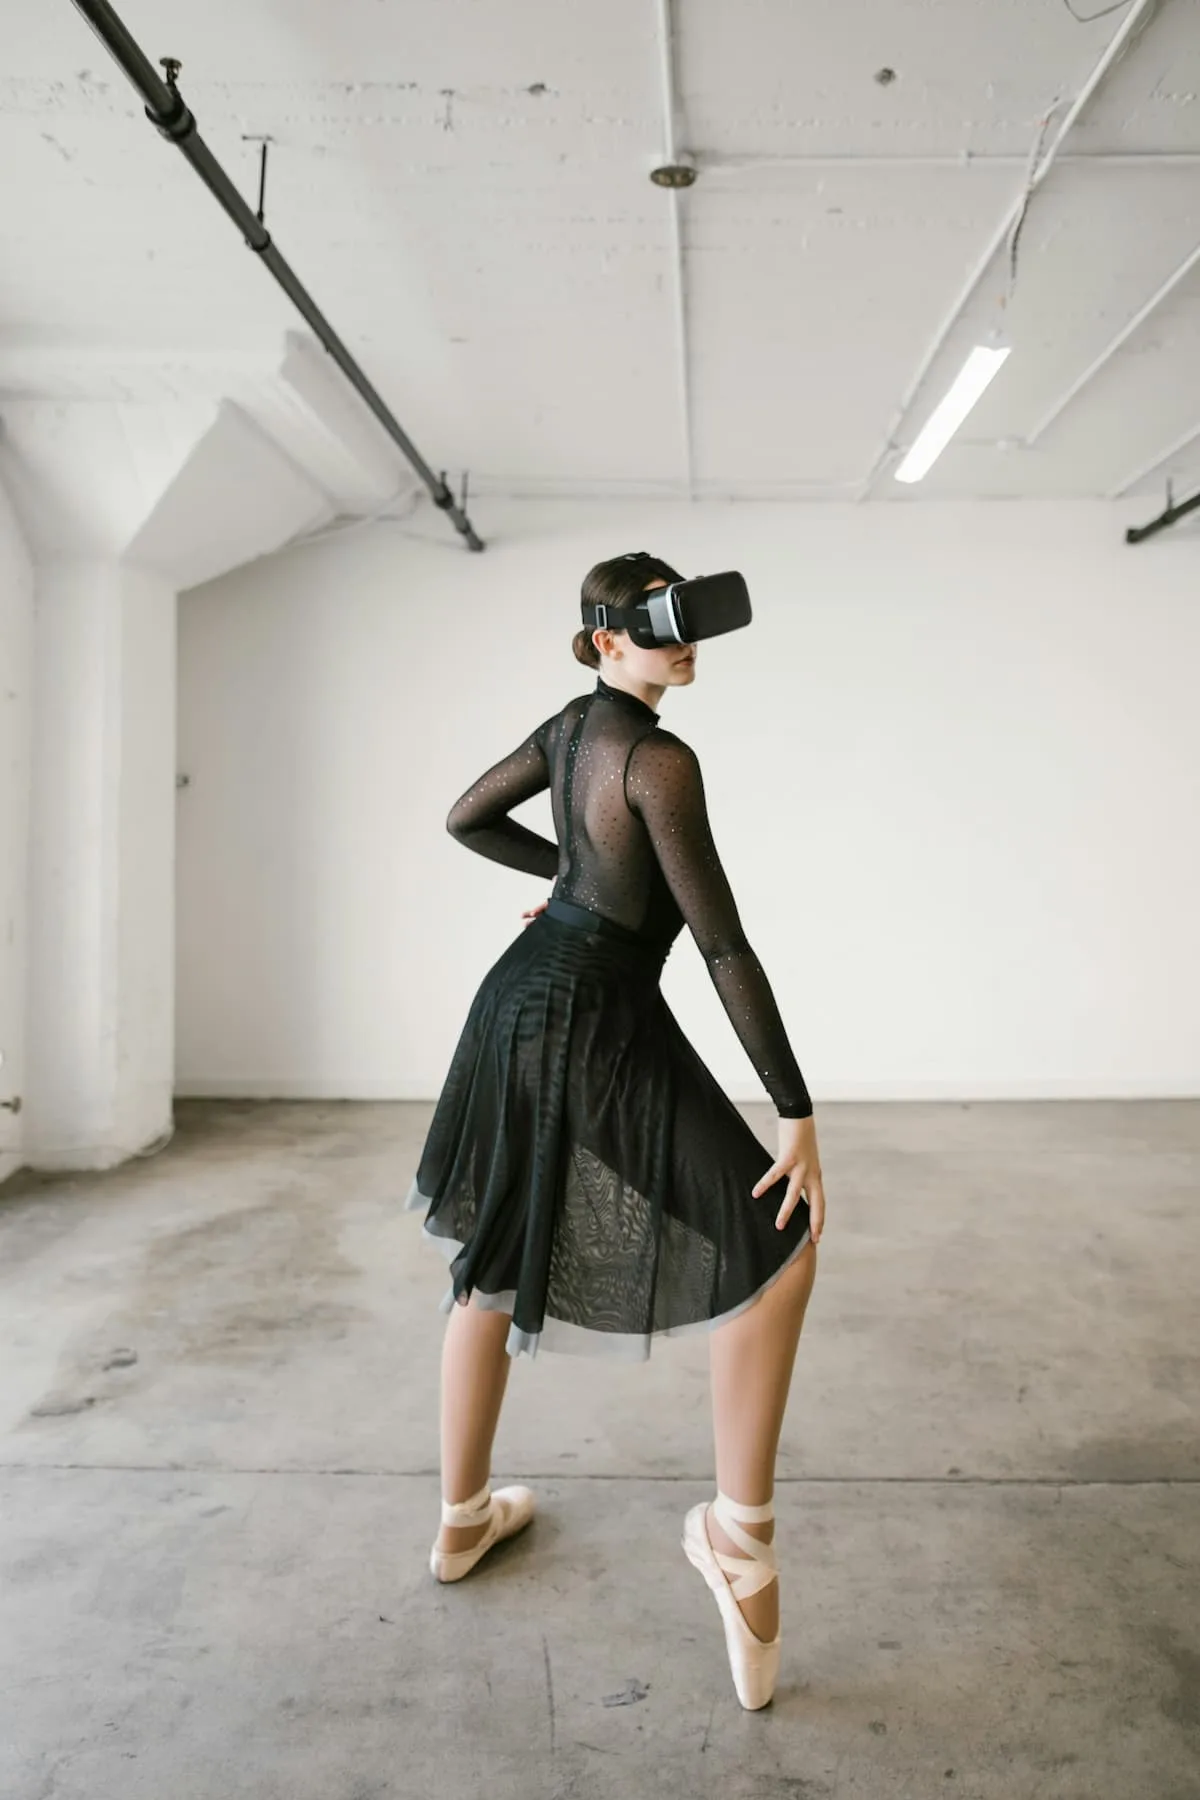 Woman in black transparent dress with VR headset dancing with right Toe forward